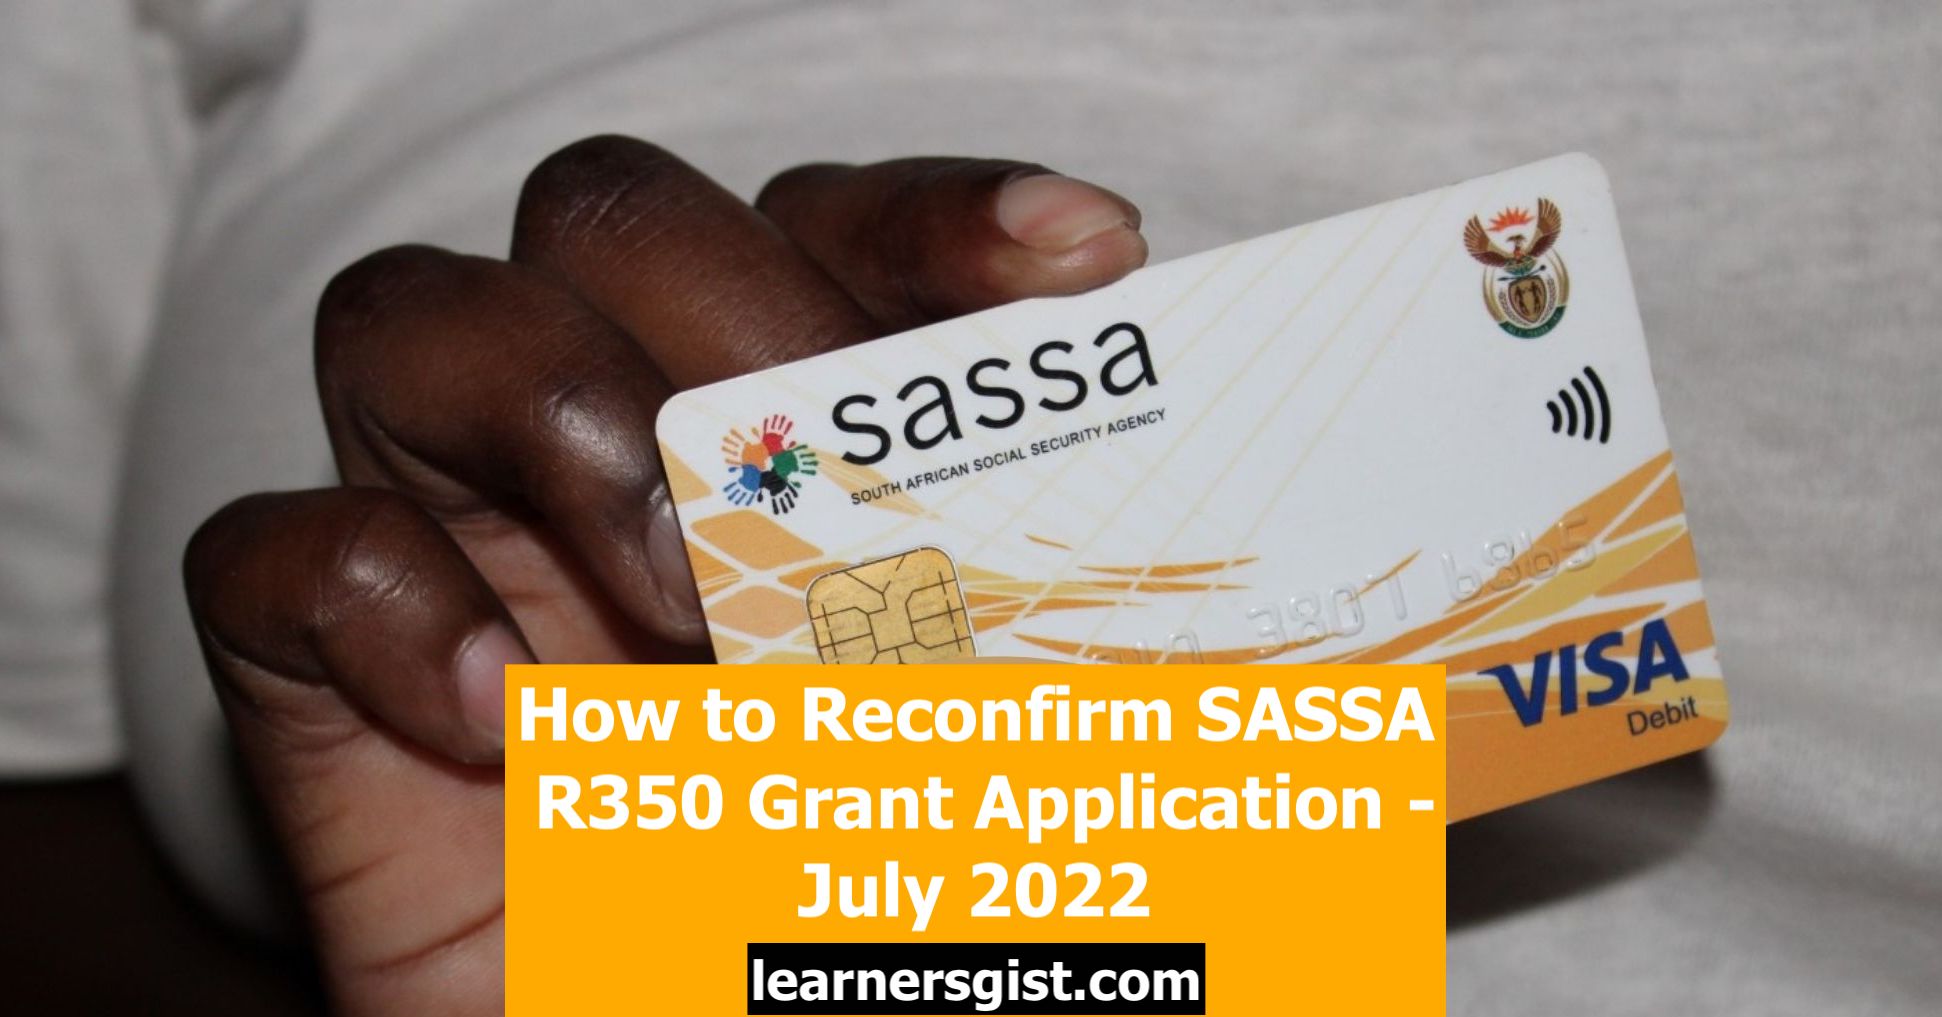 How to Reconfirm Your SASSA R350 Grant Application - July 2022